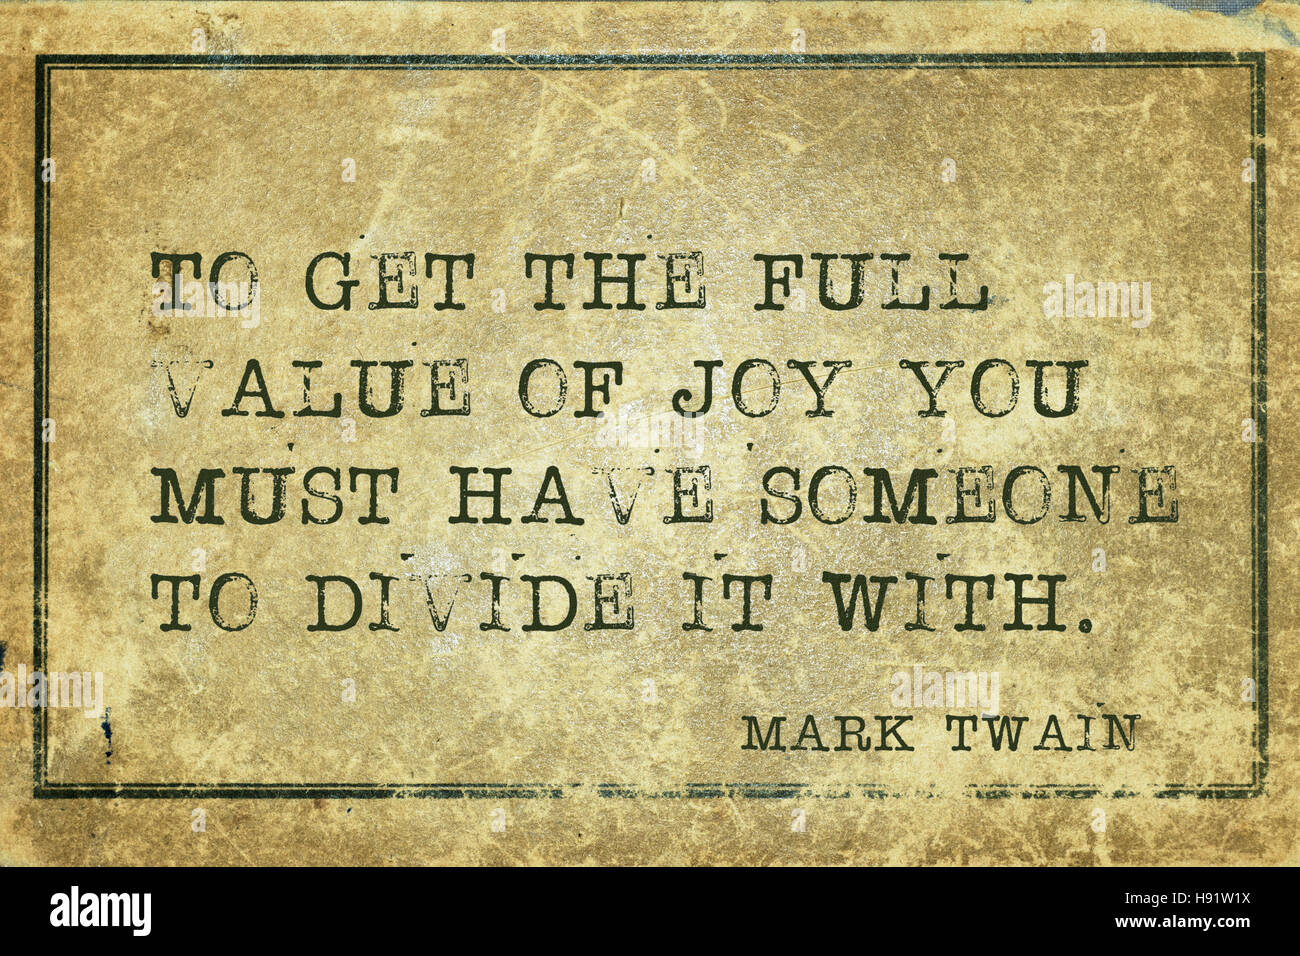 To get the full value of joy you must have someone  -  famous American writer Mark Twain quote printed on grunge vintage cardboard Stock Photo